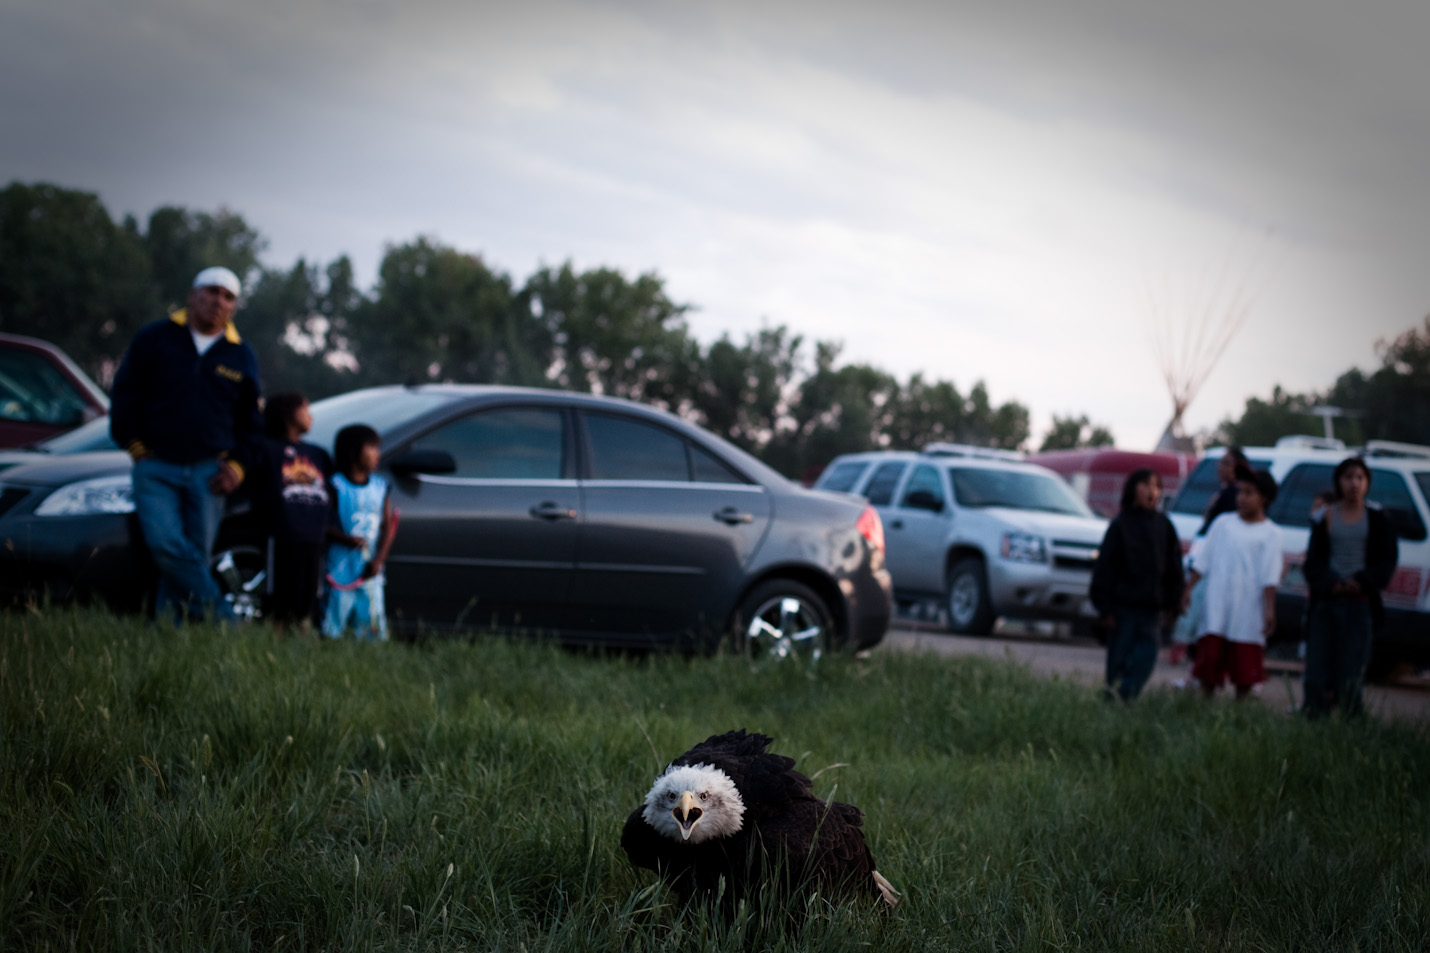 An eagle from the National Eagle Center rests after the opening ceremony of the Pow wow in Pine Ridge, South Dakota.  Eagles are considered one of the most sacred animals to the Lakota. 